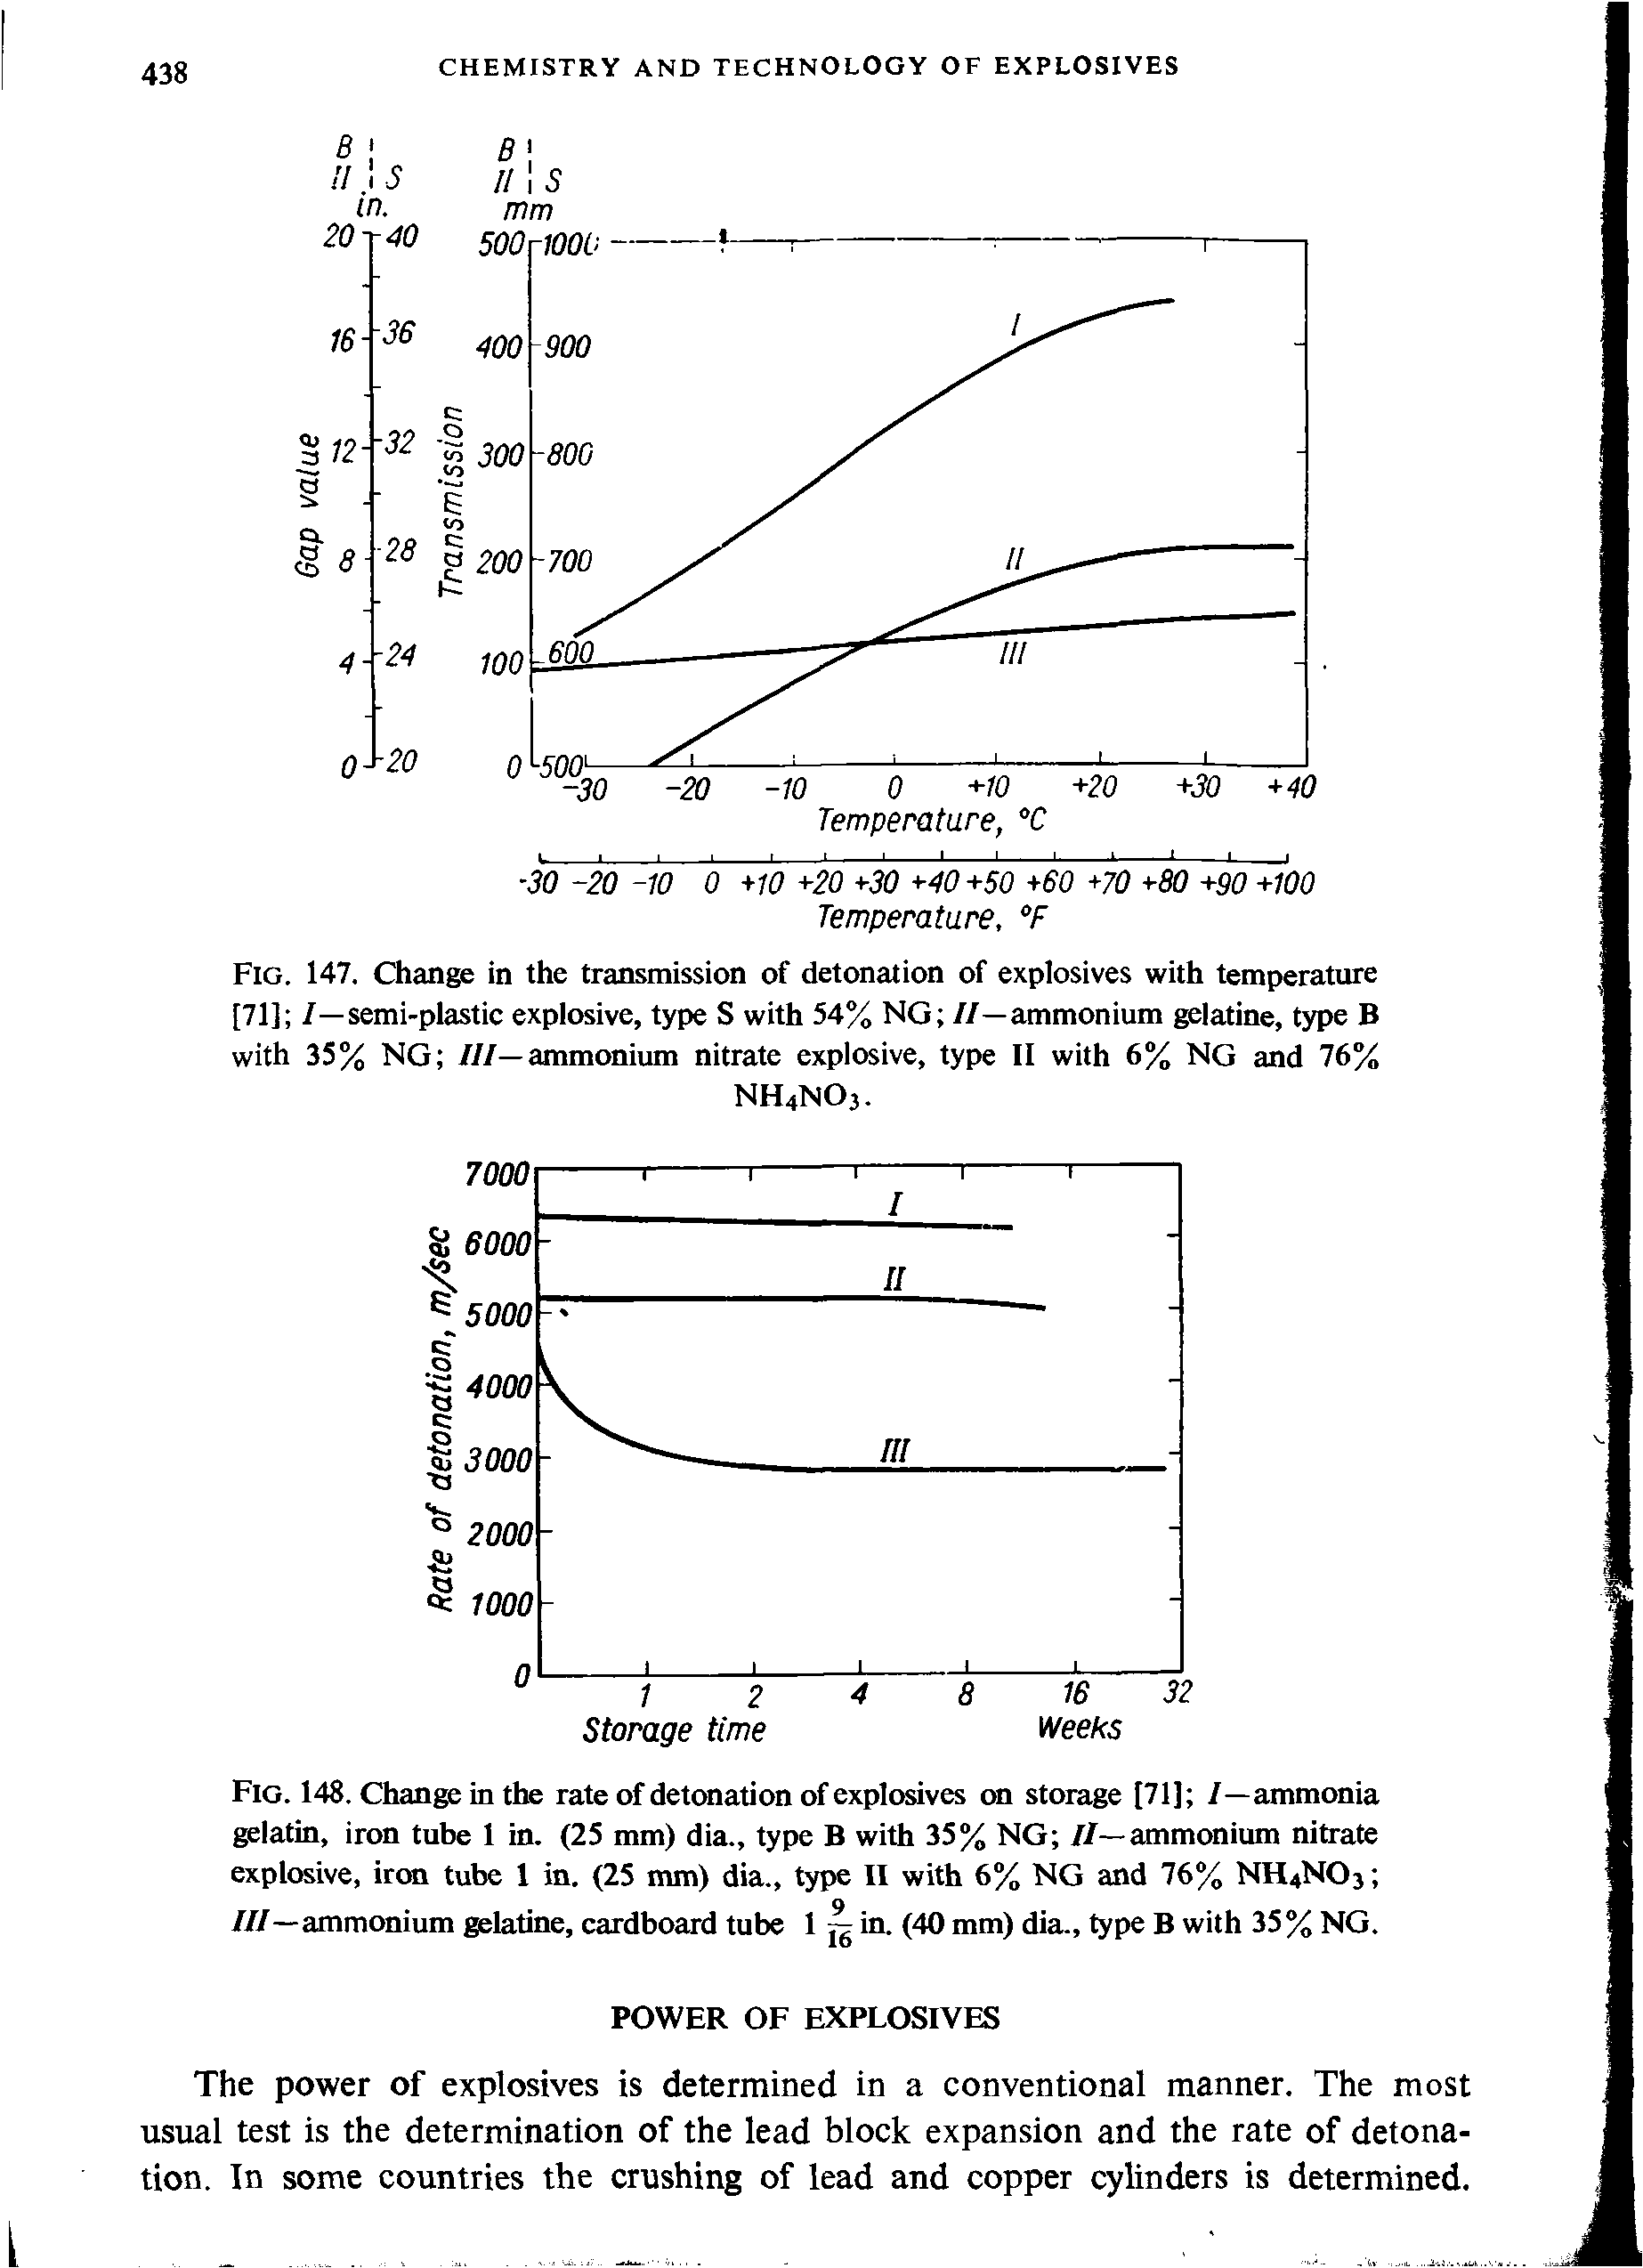 Fig. 148. Change in the rate of detonation of explosives on storage [71] /—ammonia gelatin, iron tube 1 in. (25 mm) dia., type B with 35% NG //—ammonium nitrate explosive, iron tube 1 in. (25 mm) dia., type II with 6% NG and 76% NH4NO3 ///—ammonium gelatine, cardboard tube 1 in. (40 mm) dia., type B with 35% NG.